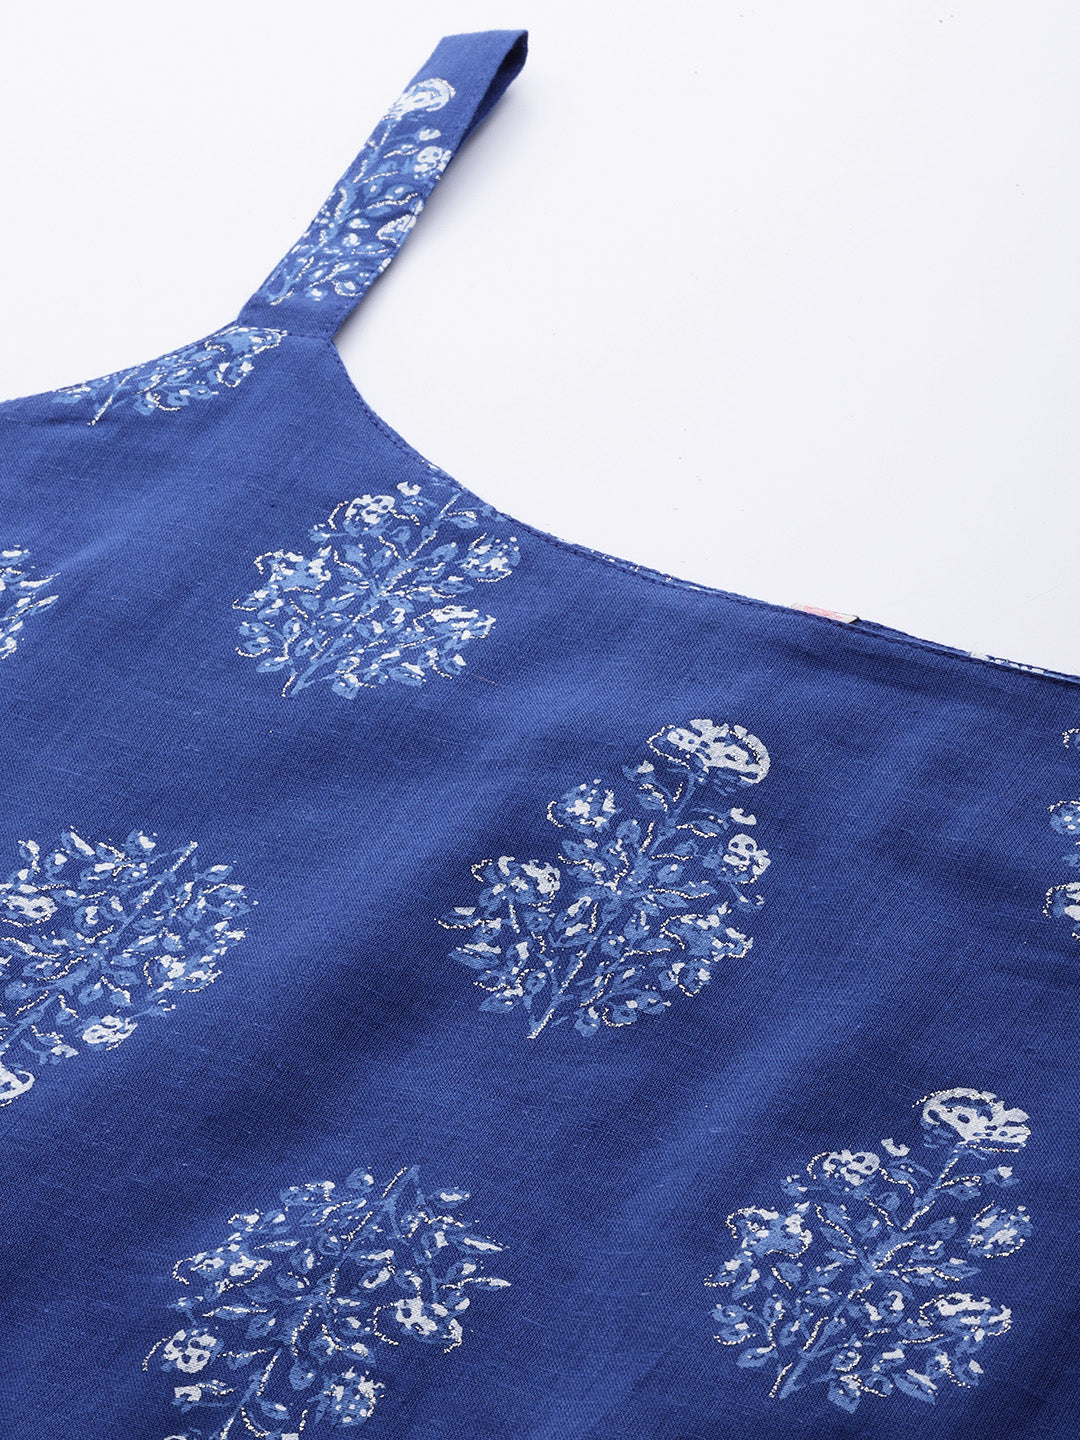 Blue & White Floral Printed Pure Cotton Tunic